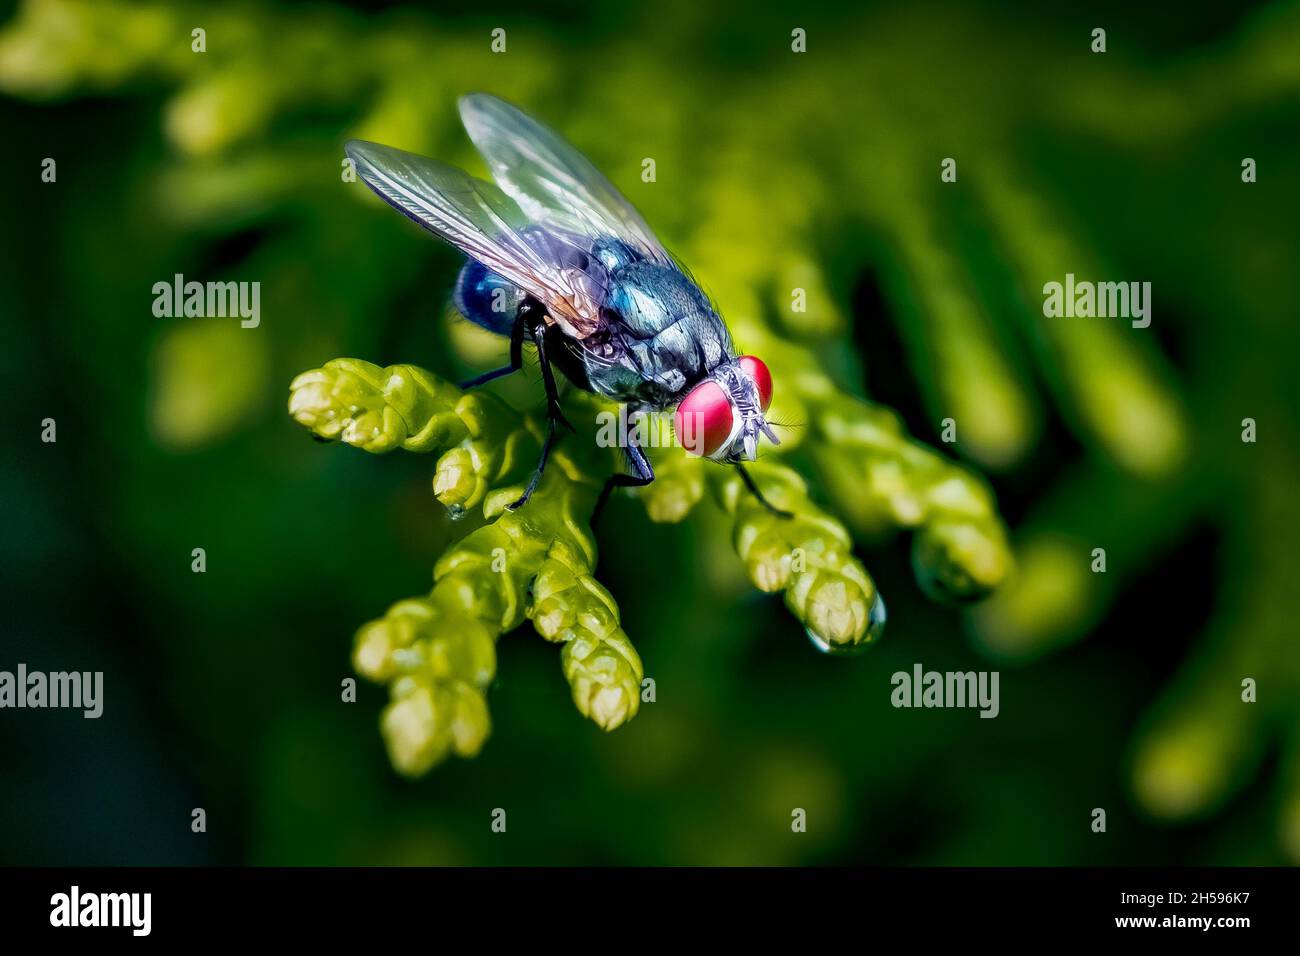 Blue Bottle Fly/Blow Fly (Calliphora vomitoria) macro, perched on an evergreen branch. Stock Photo